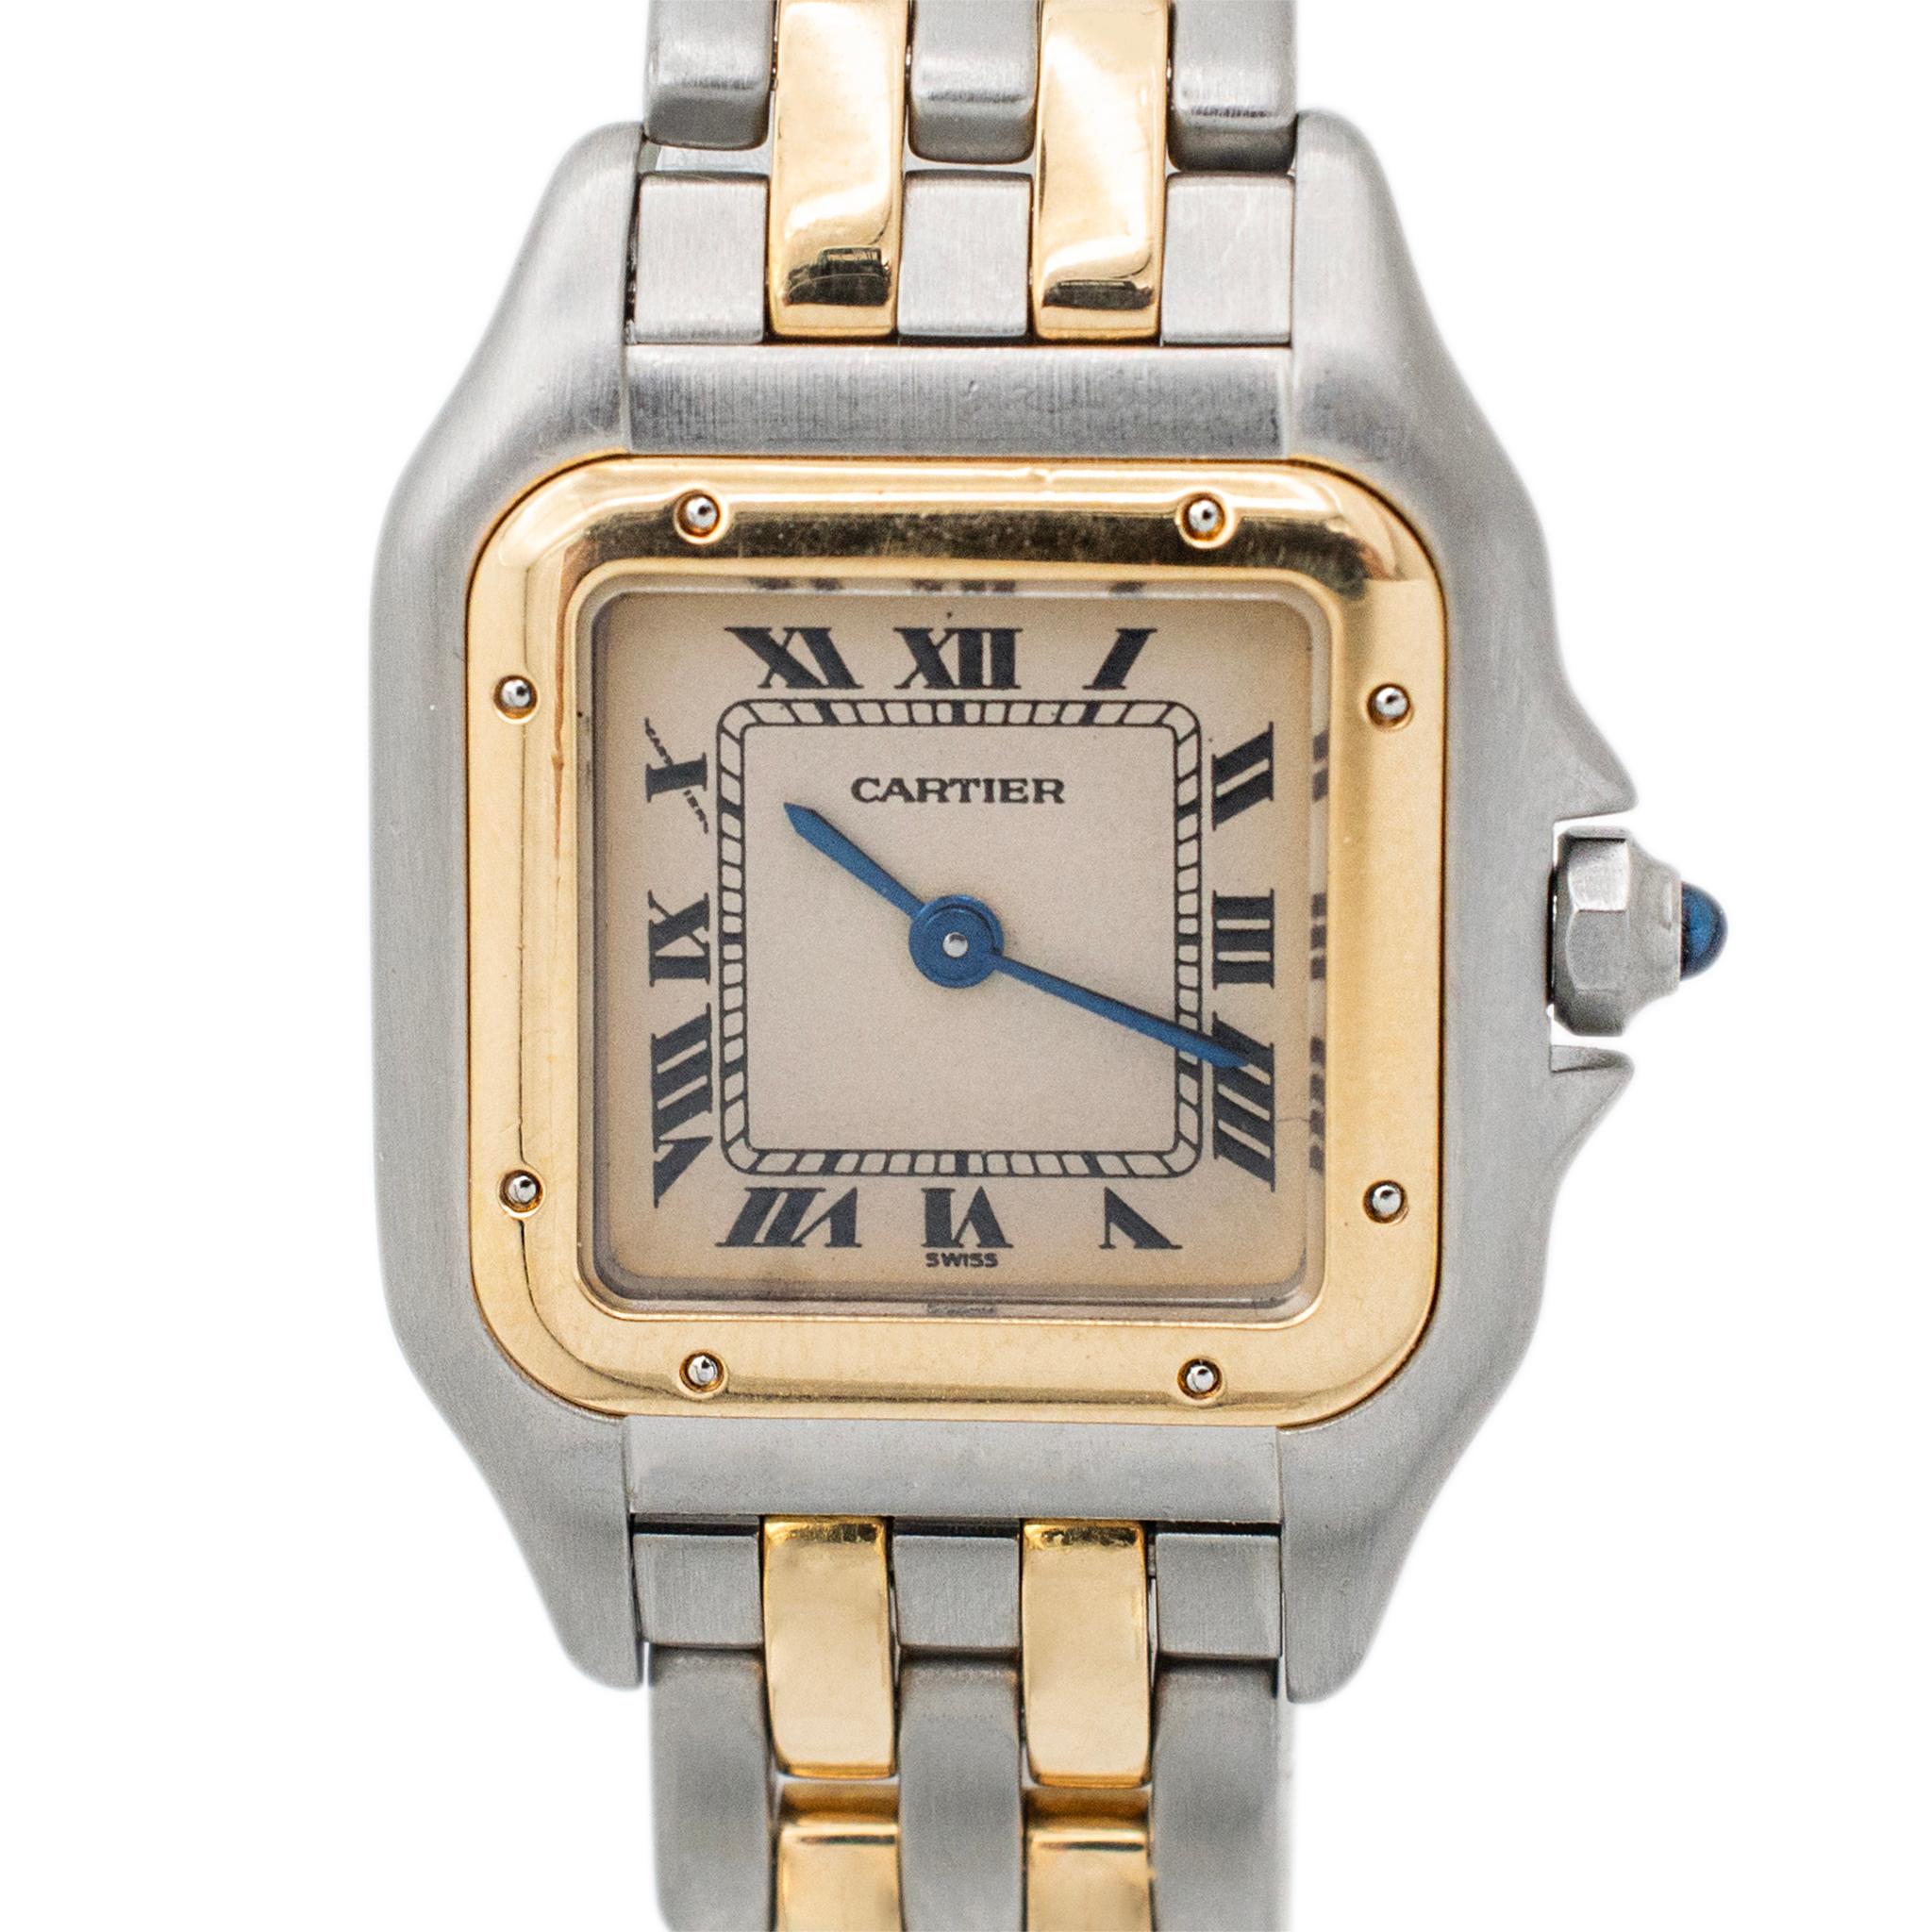 Brand: Cartier

Gender: Ladies

Metal Type: Stainless Steel and 18K Yellow Gold

Diameter: 22.00 mm

Weight: 42.55 grams

Ladies, stainless steel and 18K yellow gold, Cartier Swiss-made watch. The metals were tested and determined to be stainless